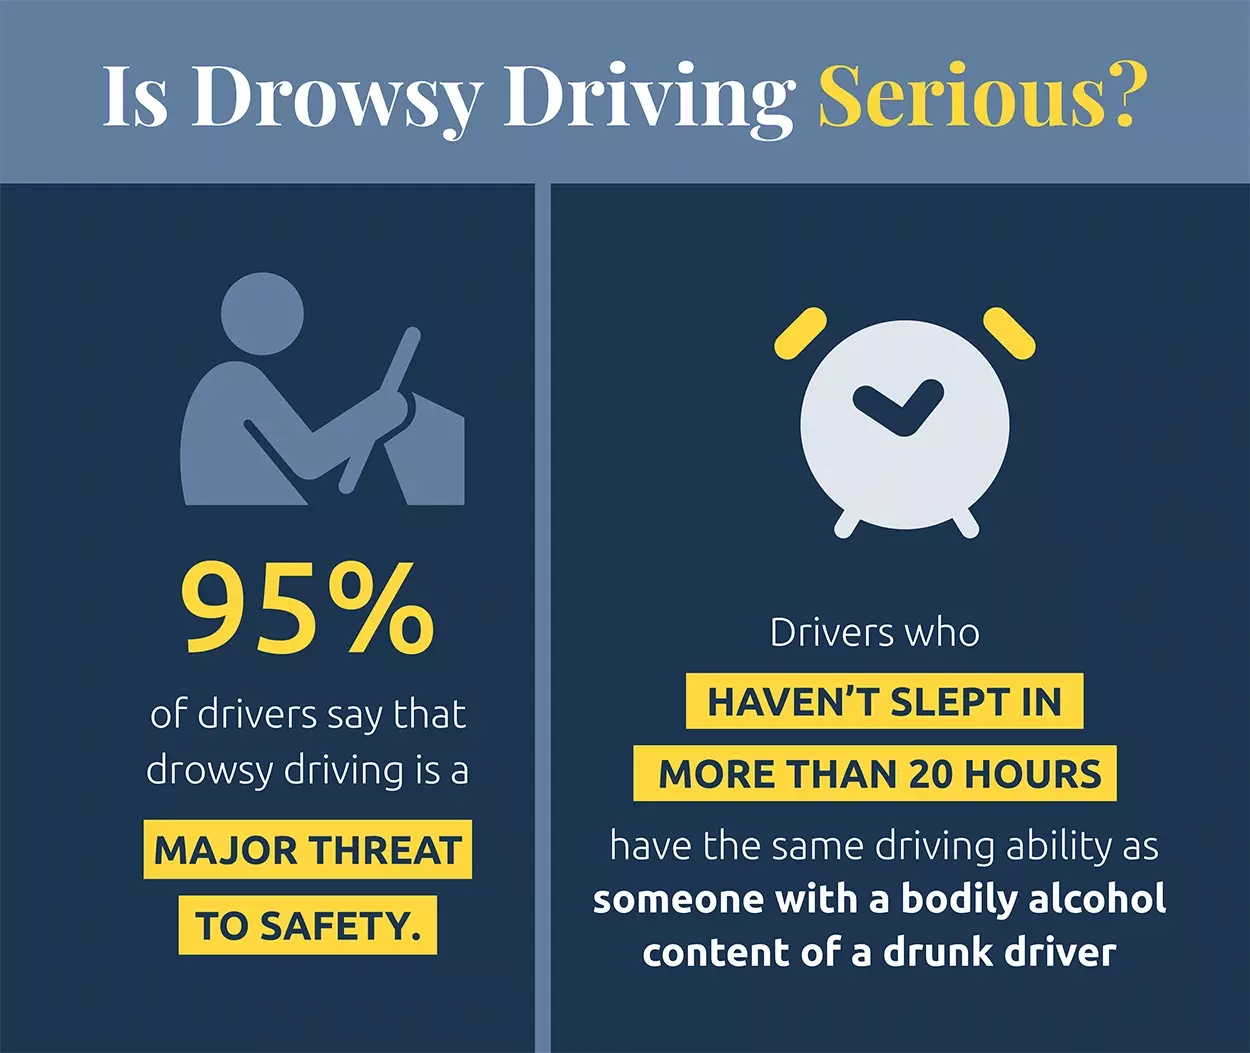 Is Drowsy Driving Serious?